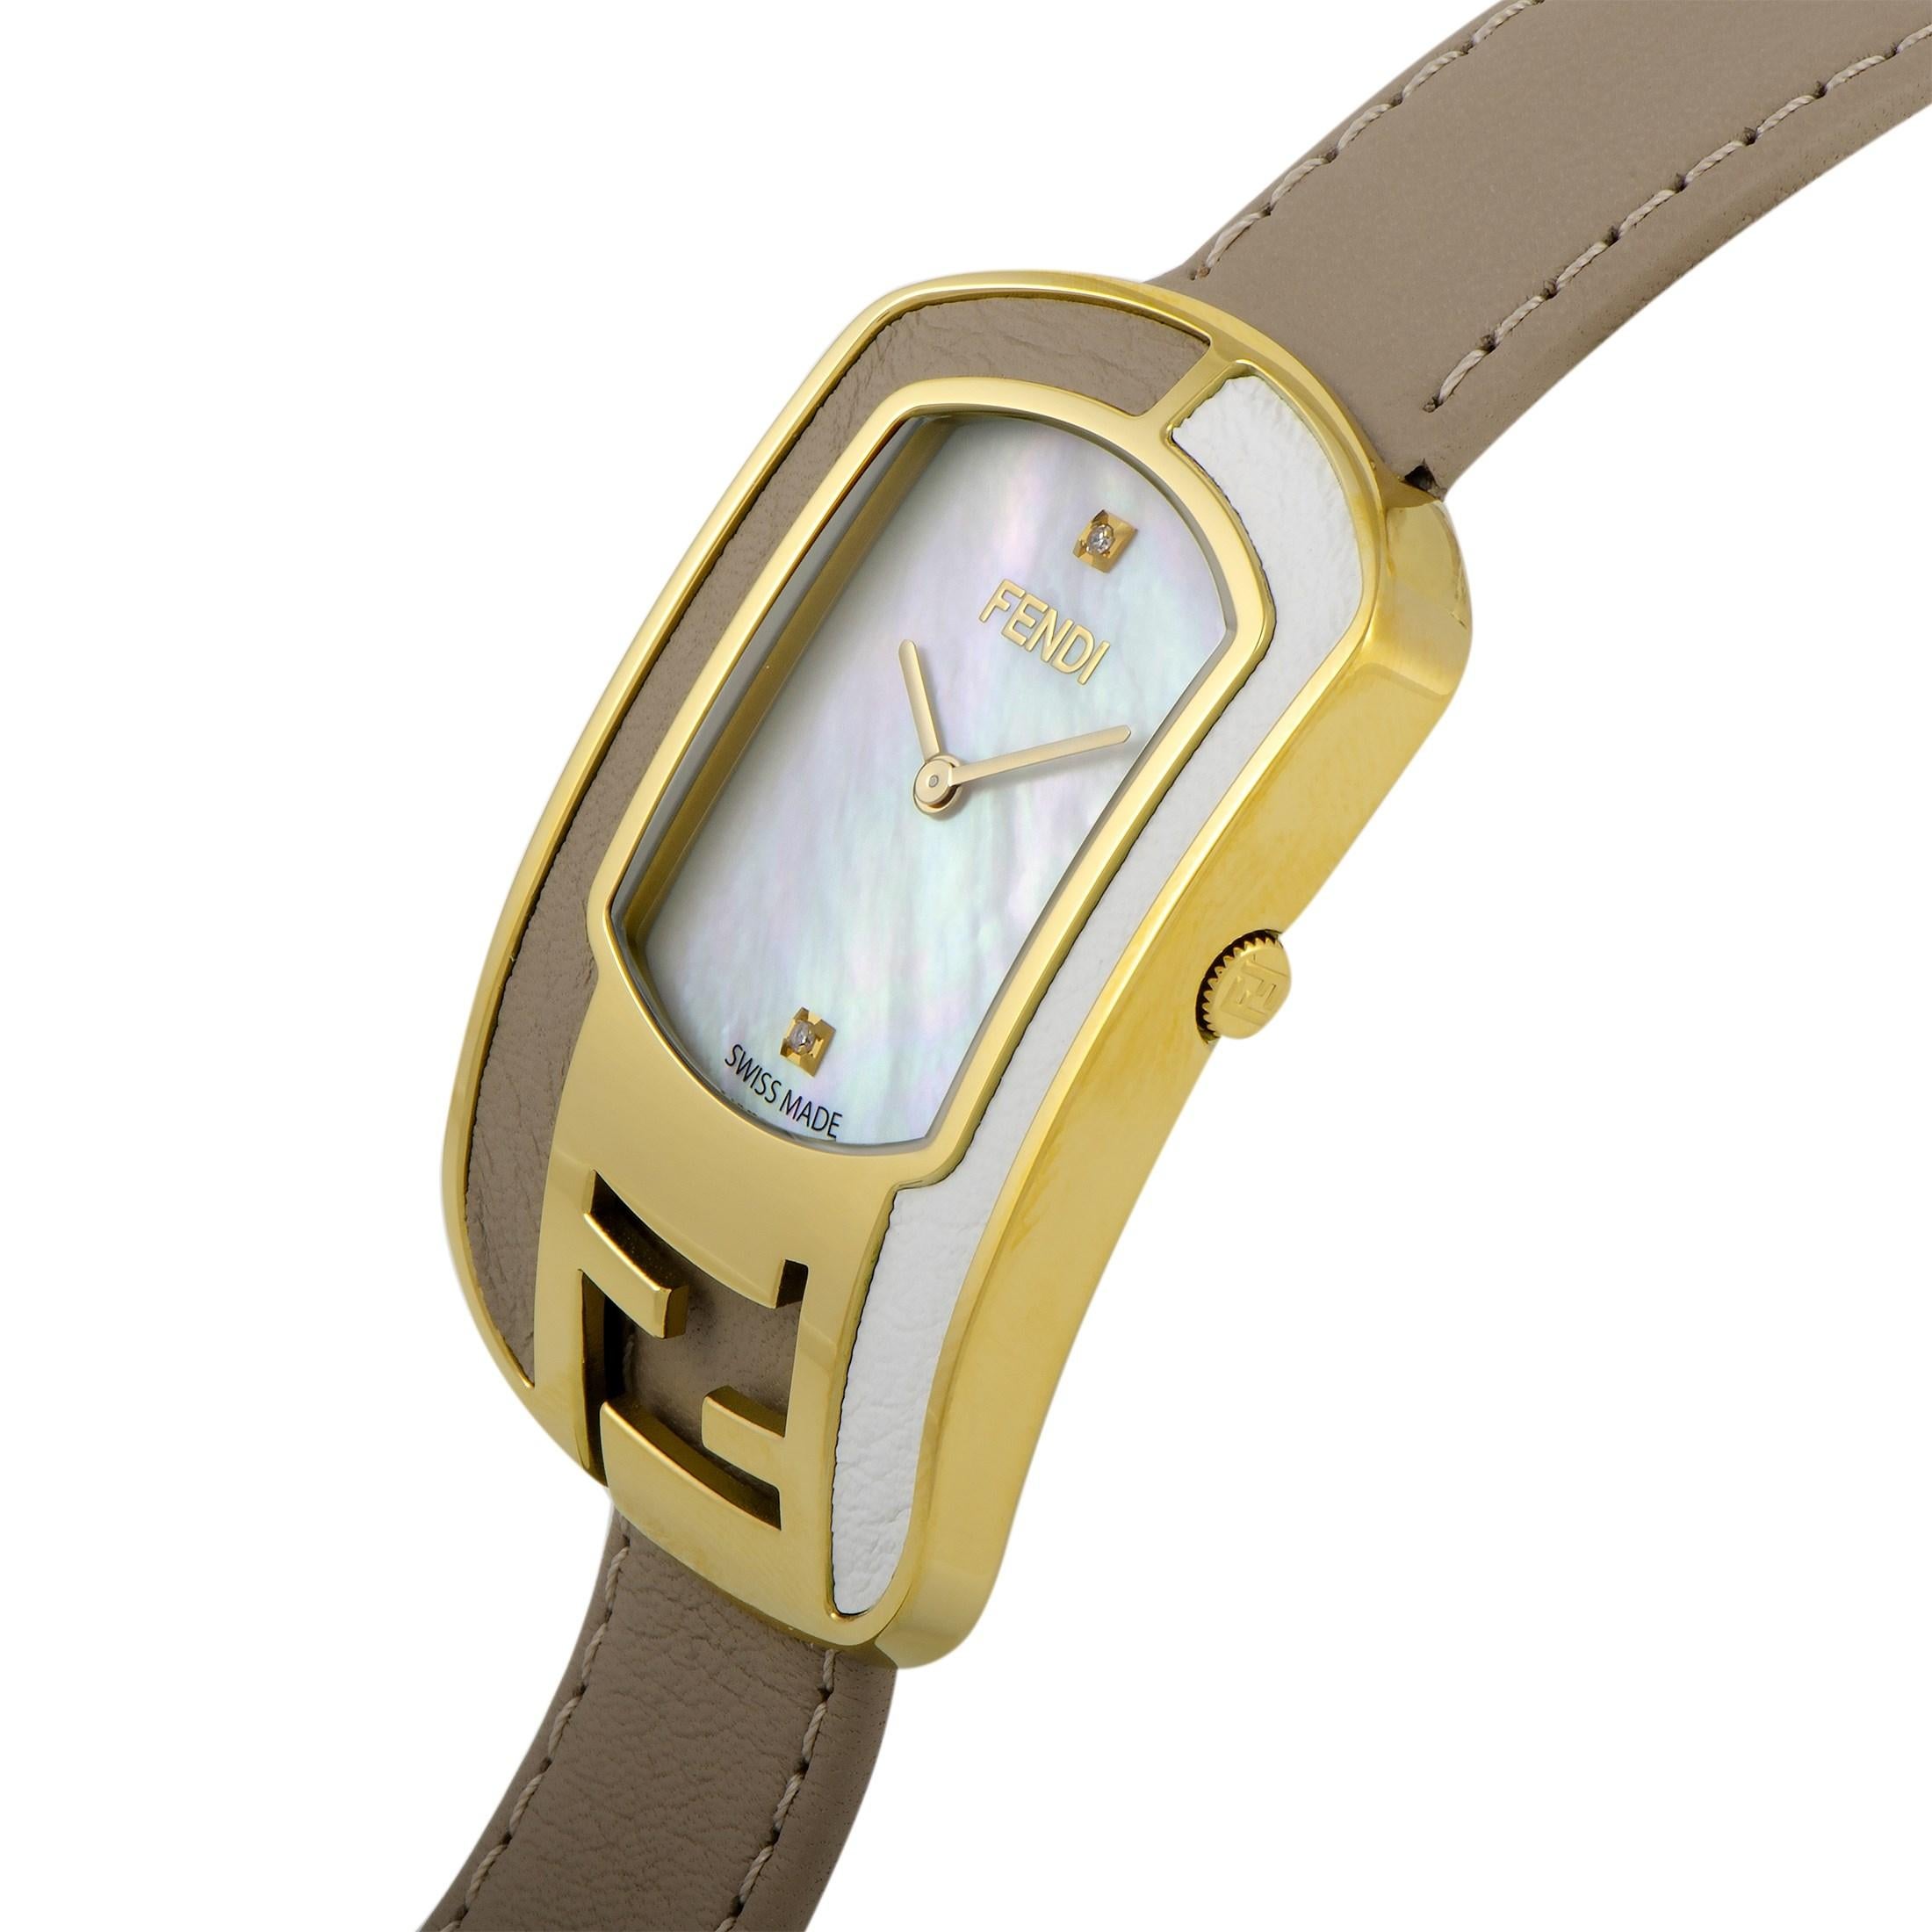 This is the Fendi Chameleon watch, reference number F336434561D1.

It is presented with a gold-tone stainless steel case that offers water resistance of 30 meters. The watch is worn on a taupe leather strap fitted with a tang buckle. The mother of